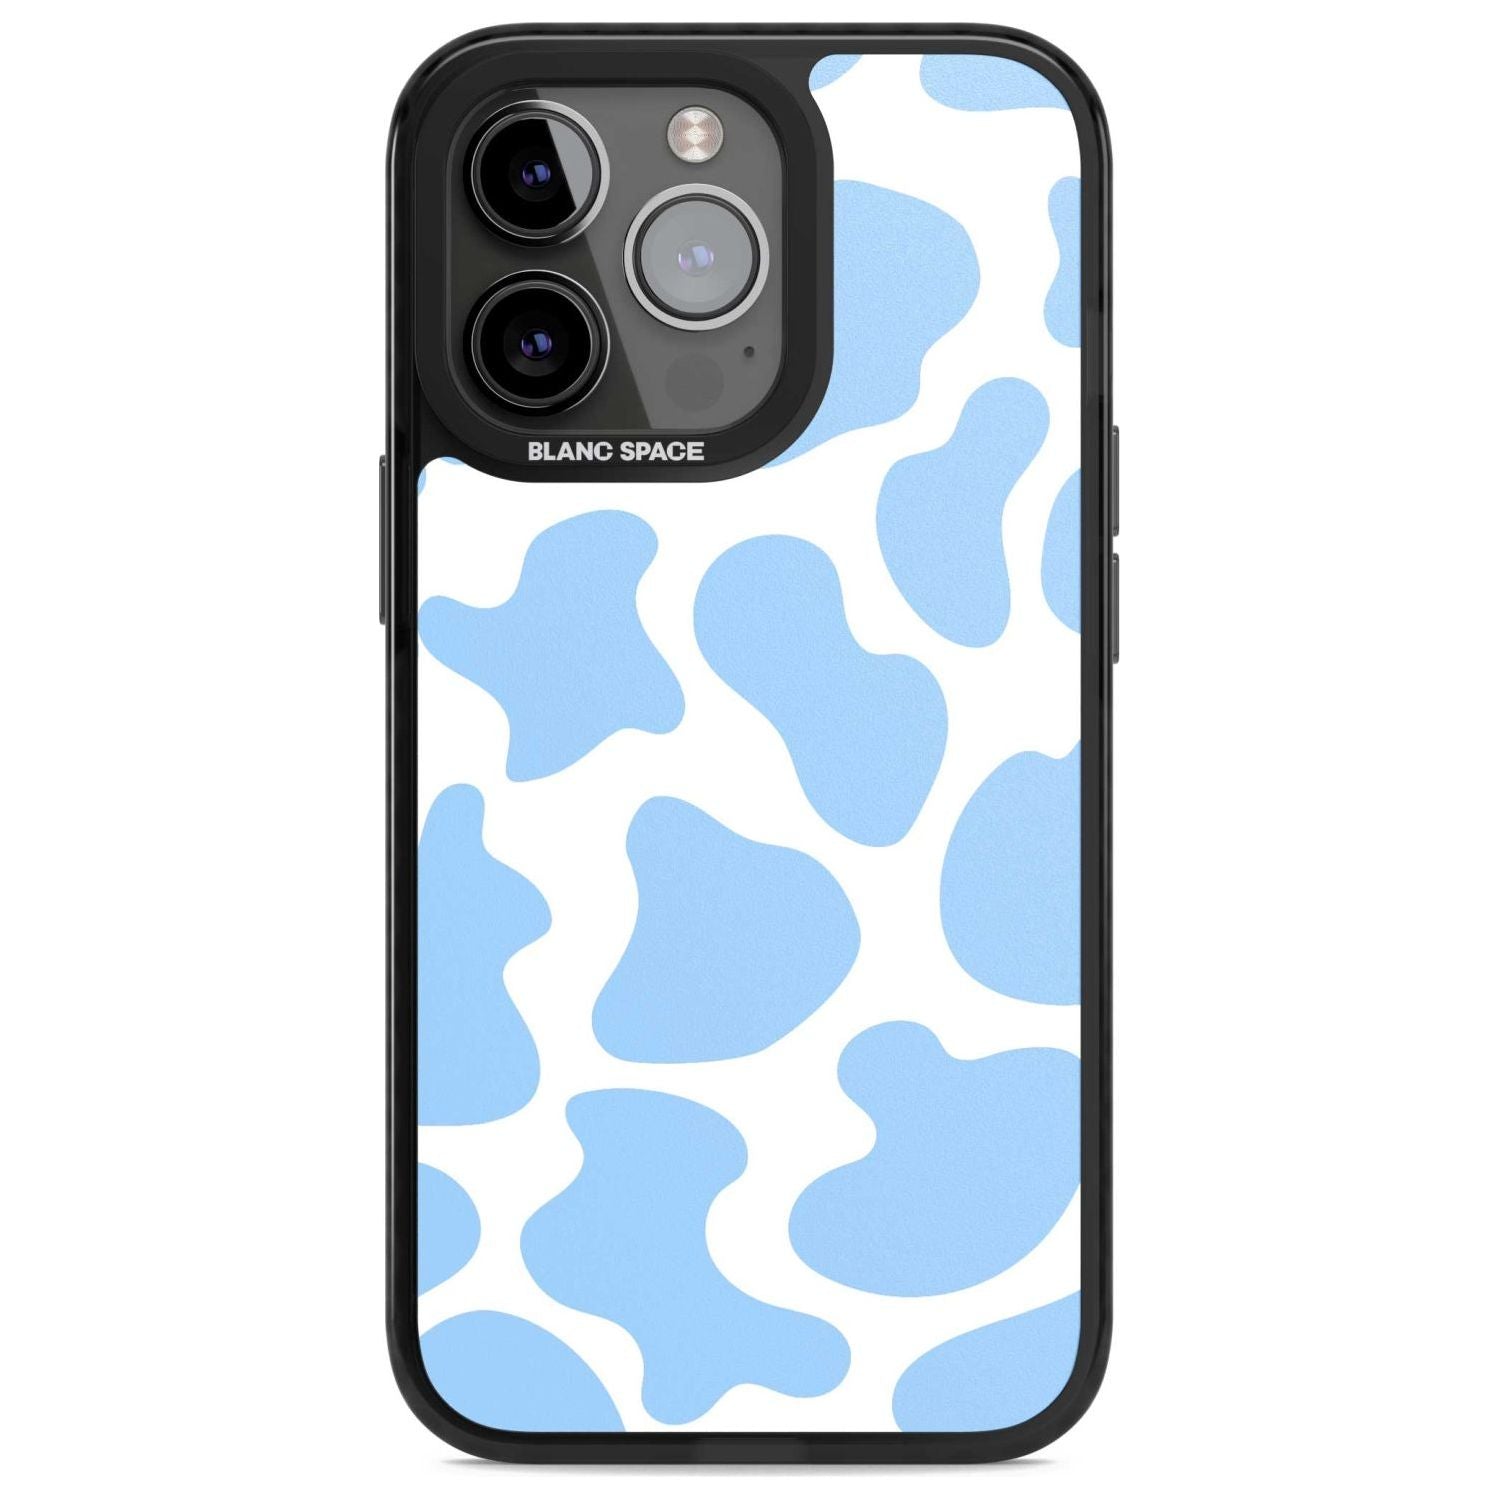 Blue and White Cow Print Phone Case iPhone 15 Pro Max / Magsafe Black Impact Case,iPhone 15 Pro / Magsafe Black Impact Case,iPhone 14 Pro Max / Magsafe Black Impact Case,iPhone 14 Pro / Magsafe Black Impact Case,iPhone 13 Pro / Magsafe Black Impact Case Blanc Space